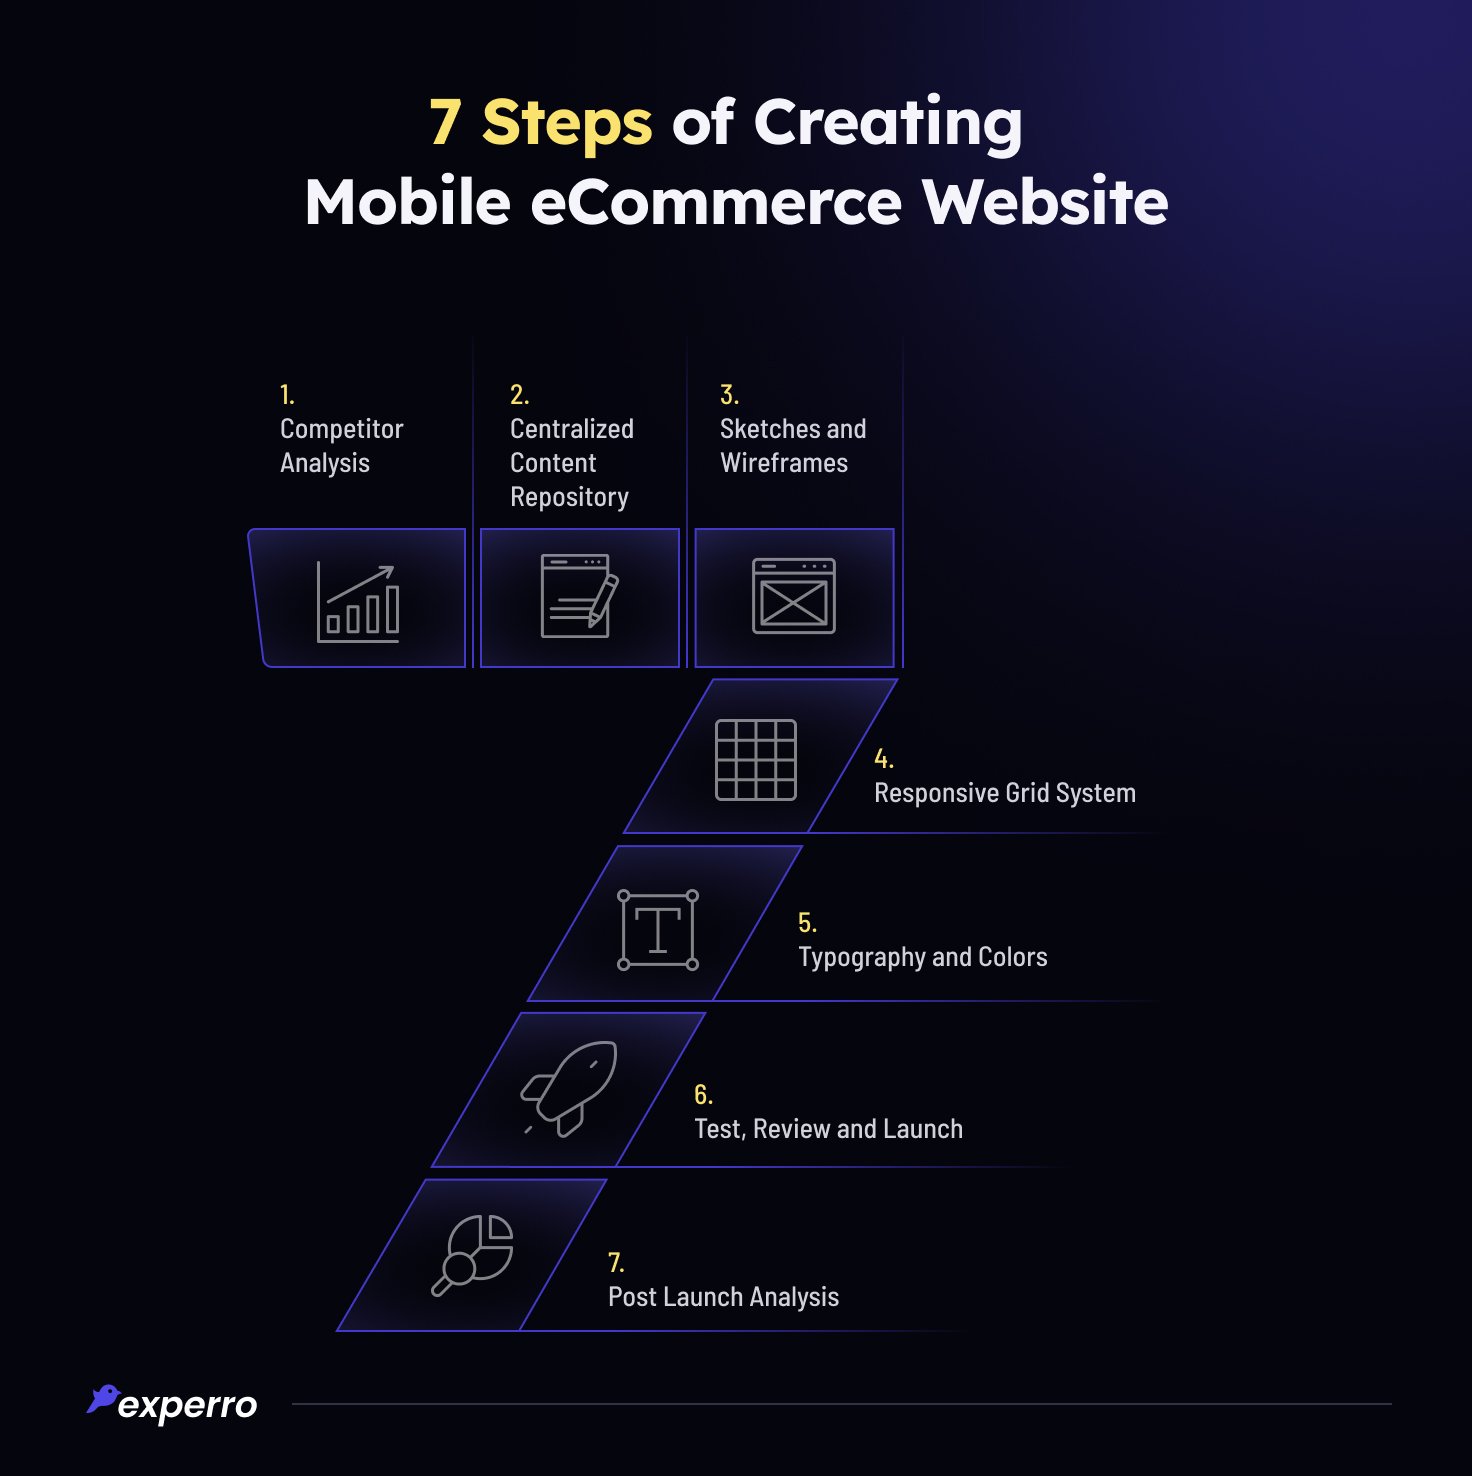 7 Steps to Create Mobile eCommerce Website